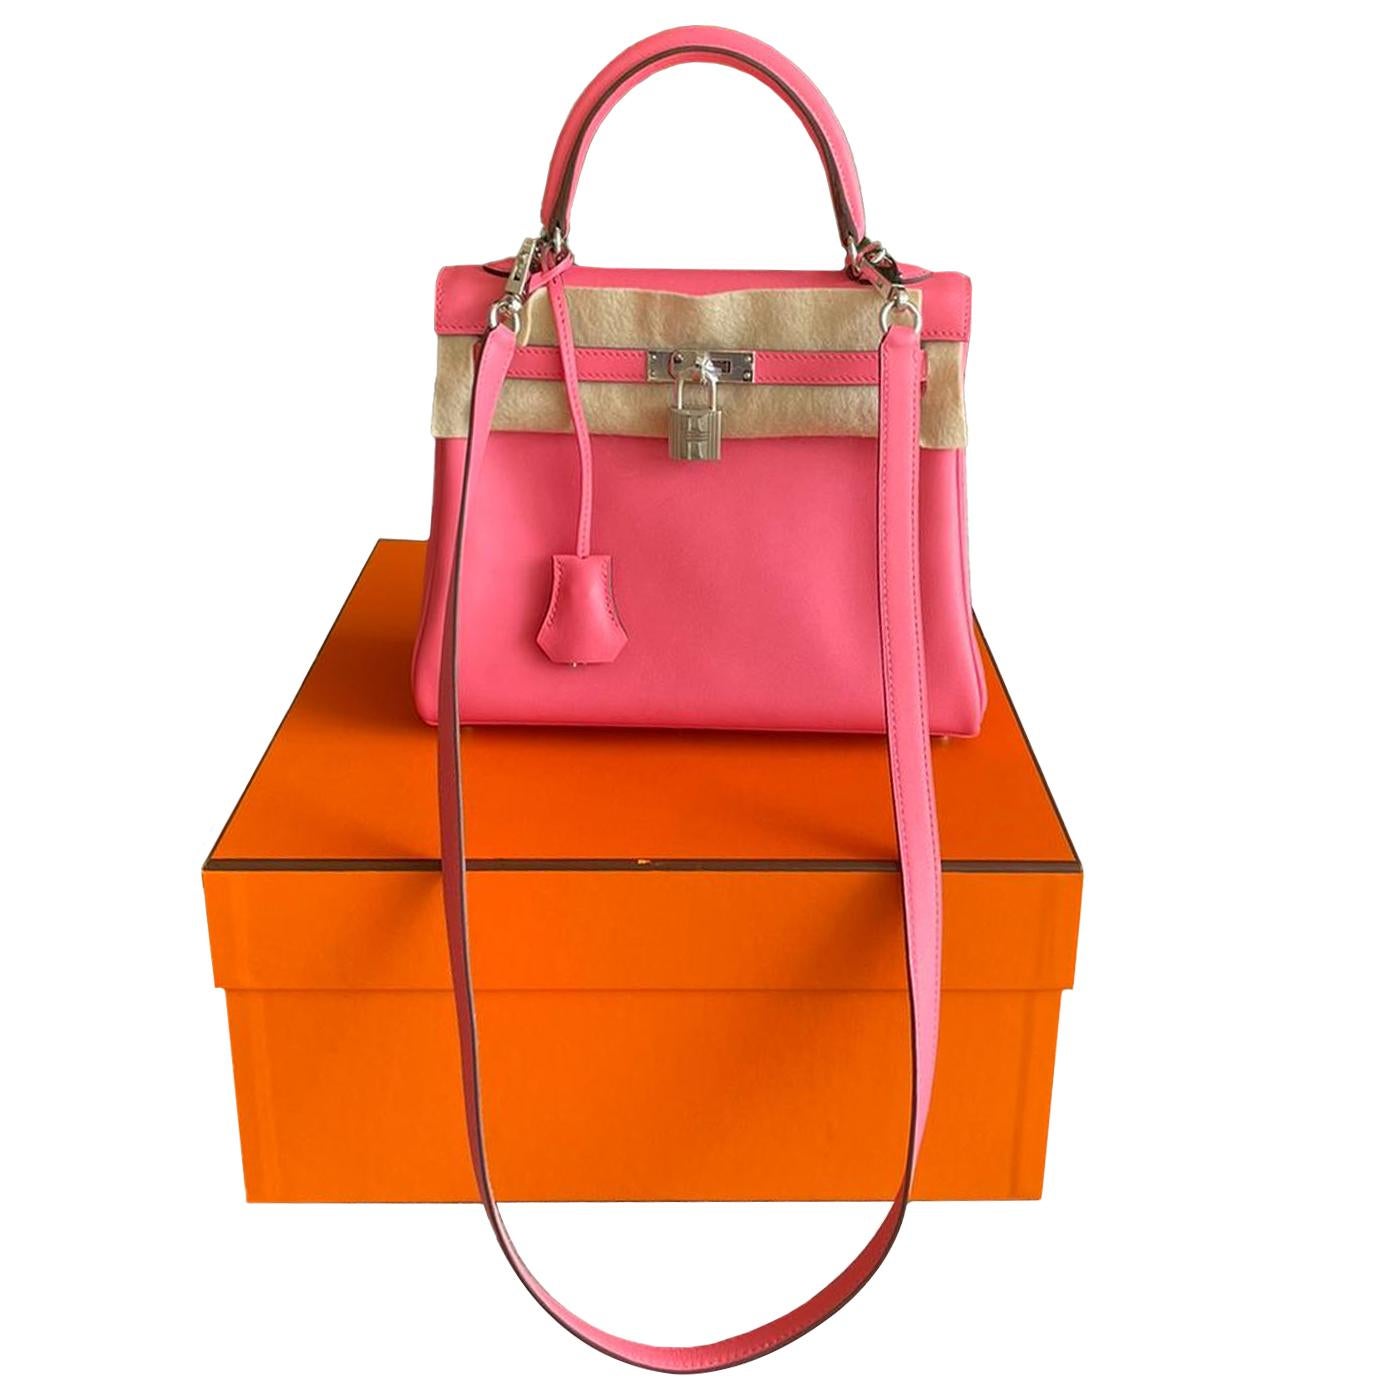 Hermes 25cm Bubblegum Pink Swift Leather Palladium Plated Kelly Retourne Bag In New Condition For Sale In Aventura, FL